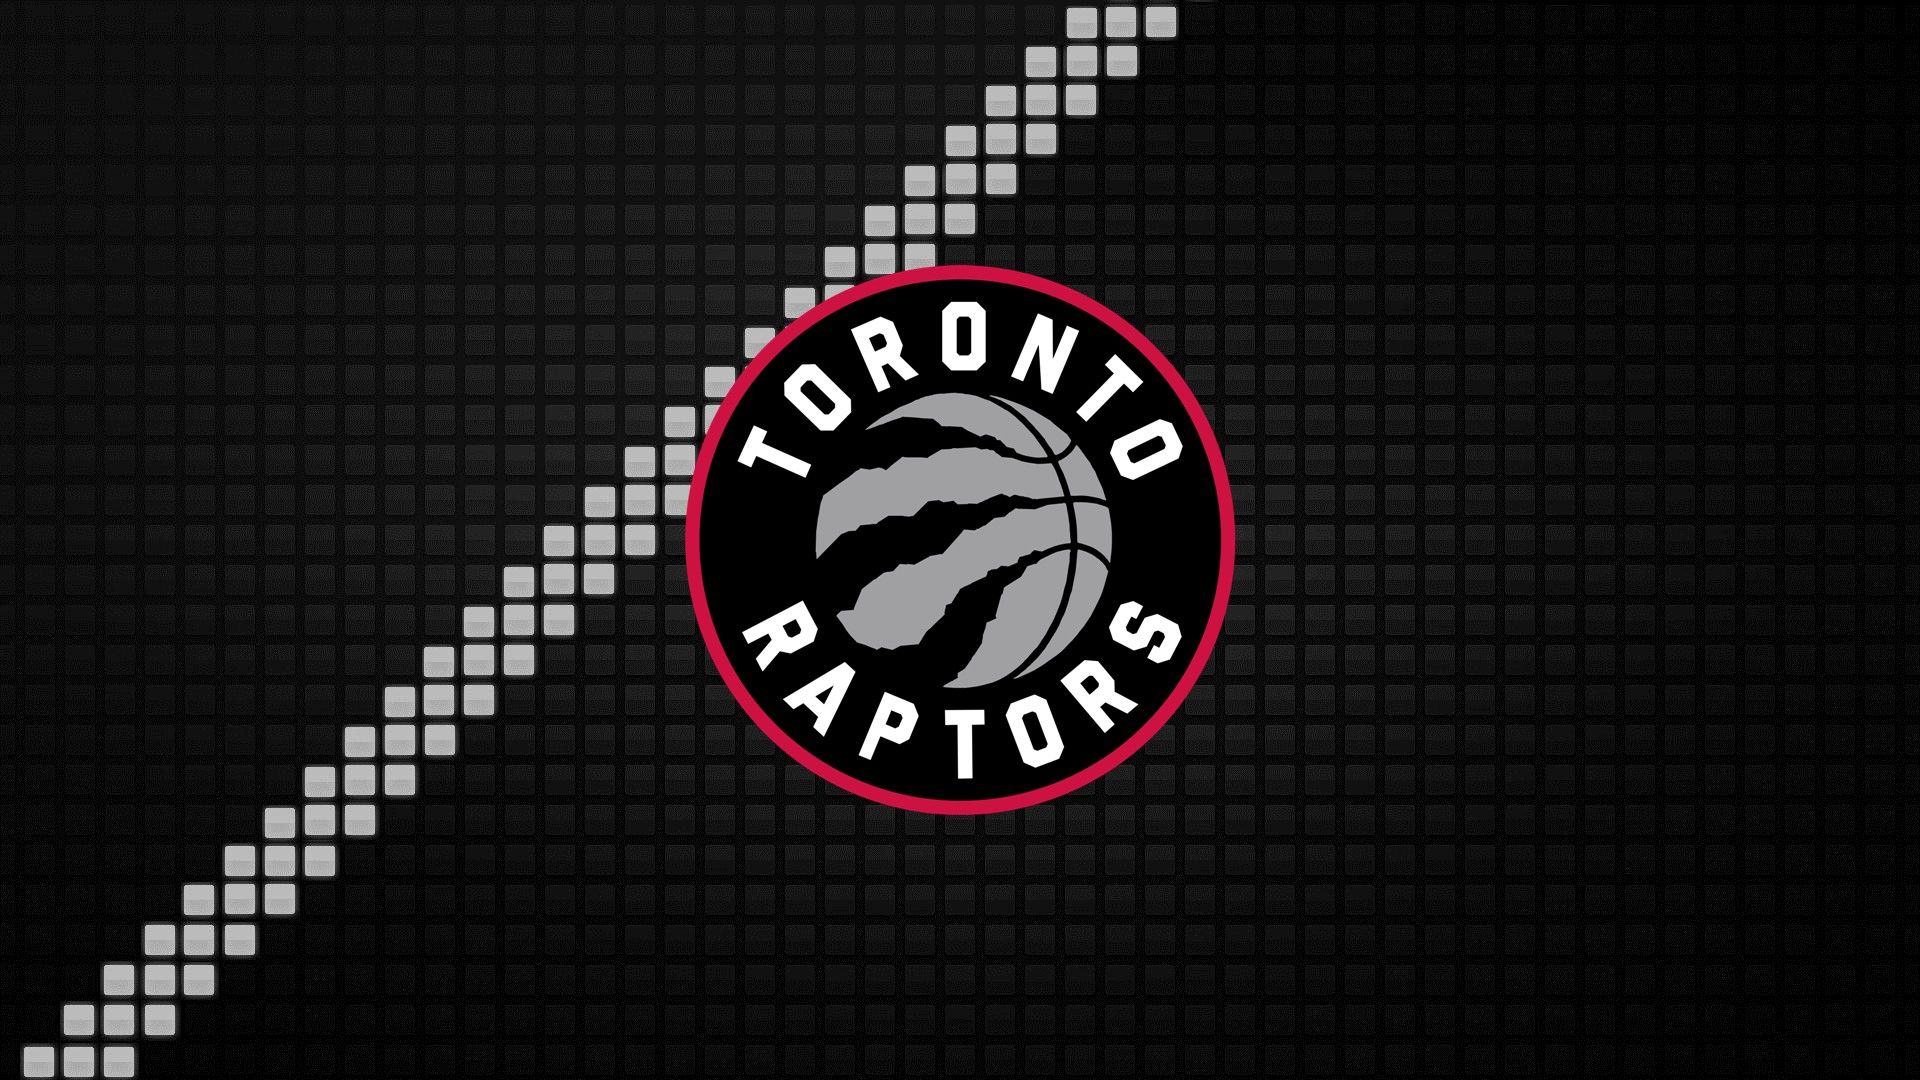 Wallpaper Desktop Raptors Basketball HD with image dimensions 1920x1080 pixel. You can make this wallpaper for your Desktop Computer Backgrounds, Windows or Mac Screensavers, iPhone Lock screen, Tablet or Android and another Mobile Phone device